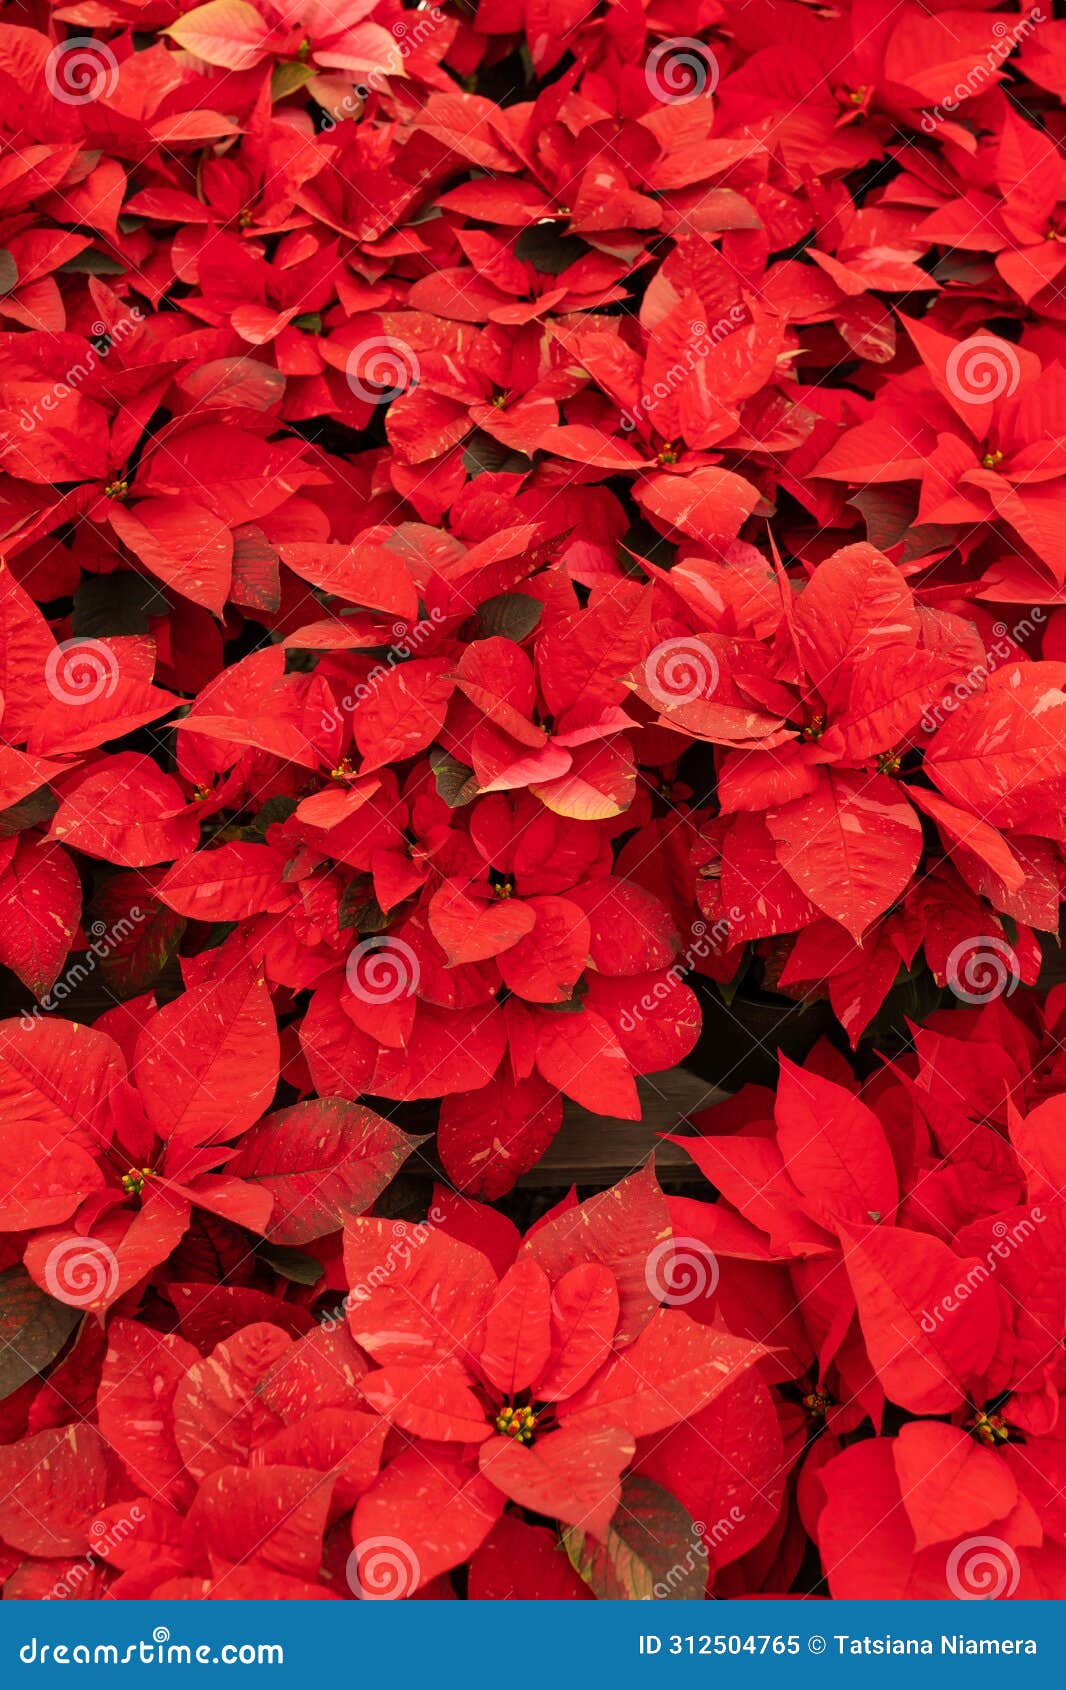 many red freedom jingle bells poinsettia flower, with star-d red leaves, christmas